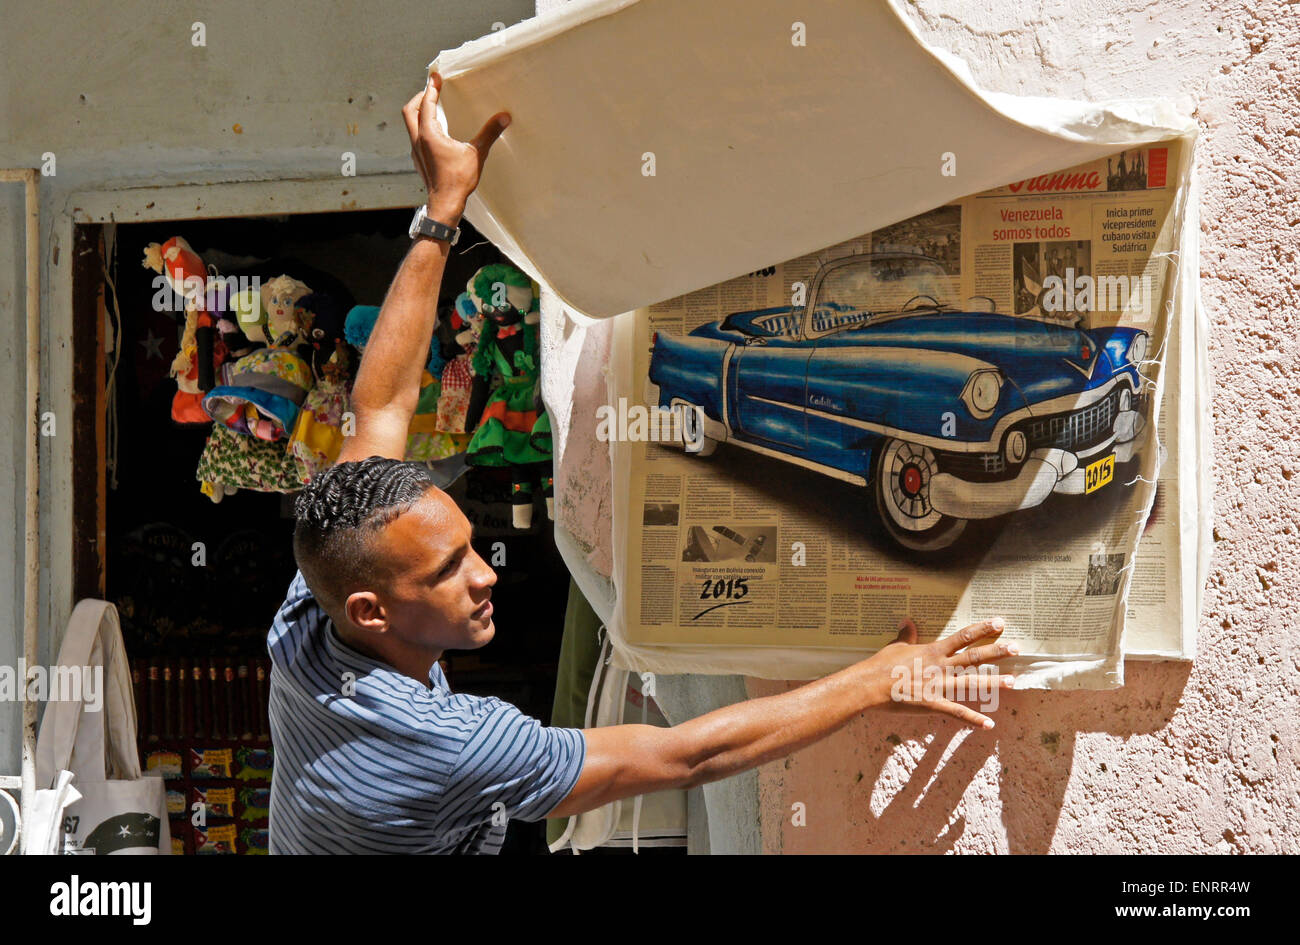 Artist showing his paintings outside shop in Habana Vieja (Old Havana), Cuba Stock Photo